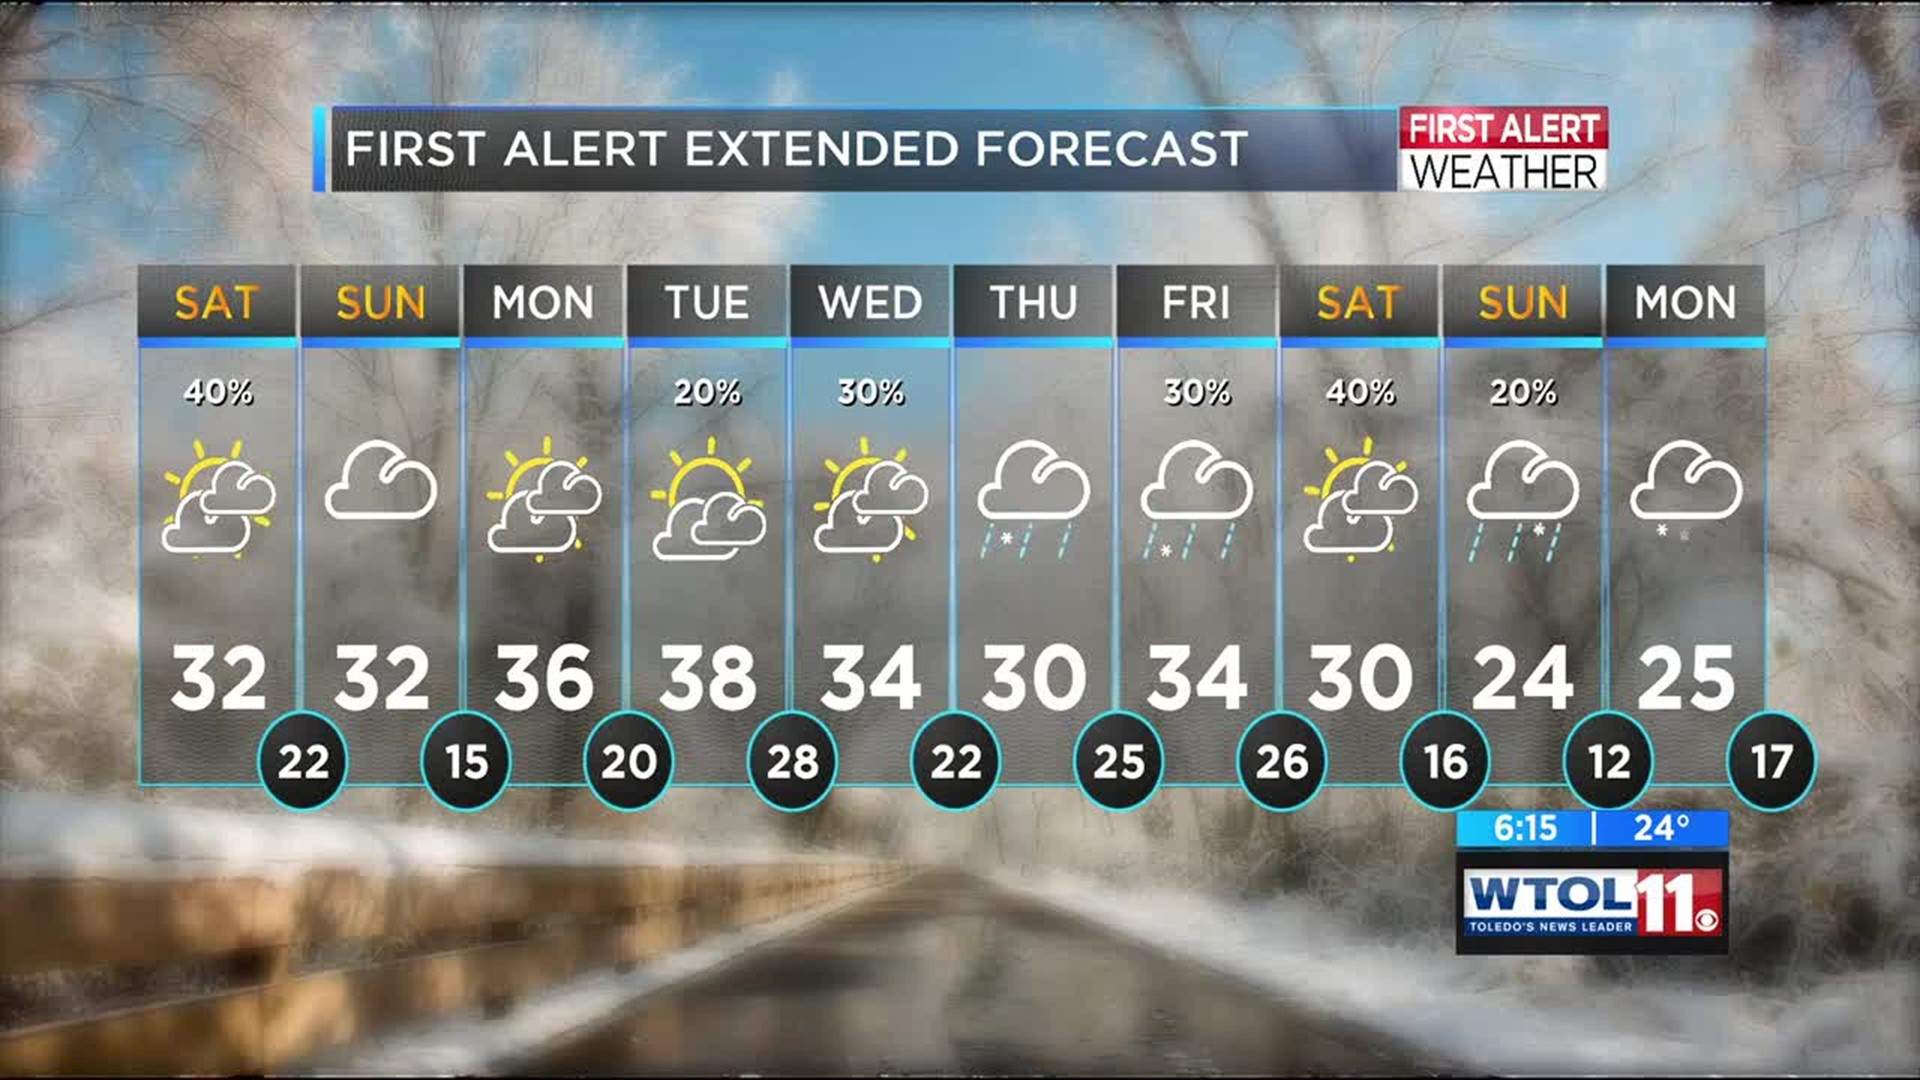 Light snow moving in this afternoon, blustery night ahead